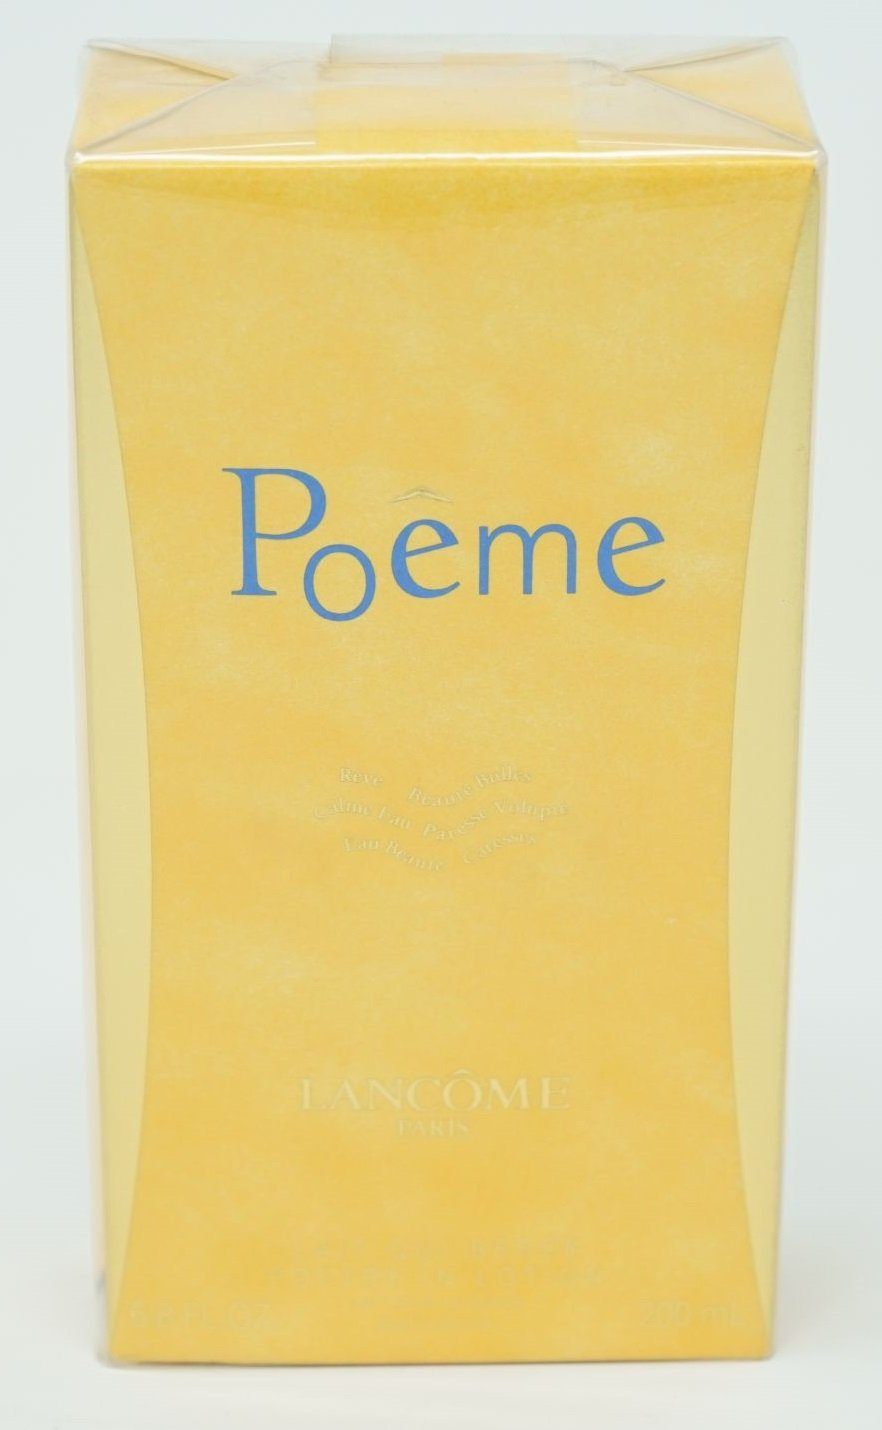 LANCOME Körperpflegeduft Lancome Poeme Poetry in Motion Body Lotion 200 ml